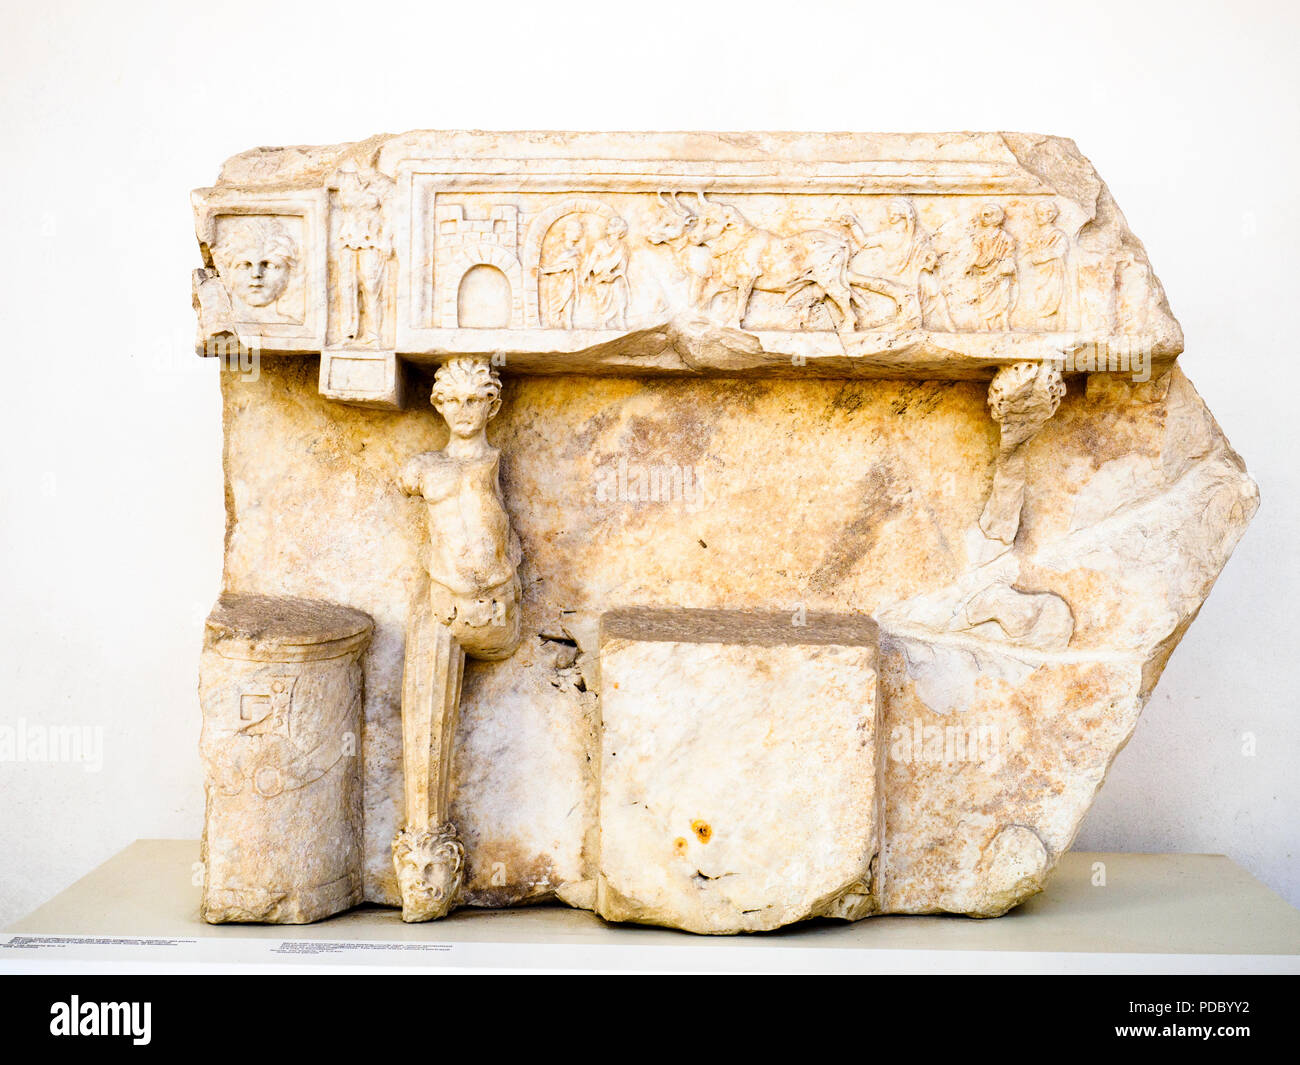 Block with a portrayal of the folding curule seat, which symbolised the power of senior magistrates endowed with imperium, known as curules magistrates. The upper frieze shows a portrayal of a city's foundation from via Salaria (antonine period) - National Roman Museum - The Baths of Diocletian - Rome, Italy Stock Photo